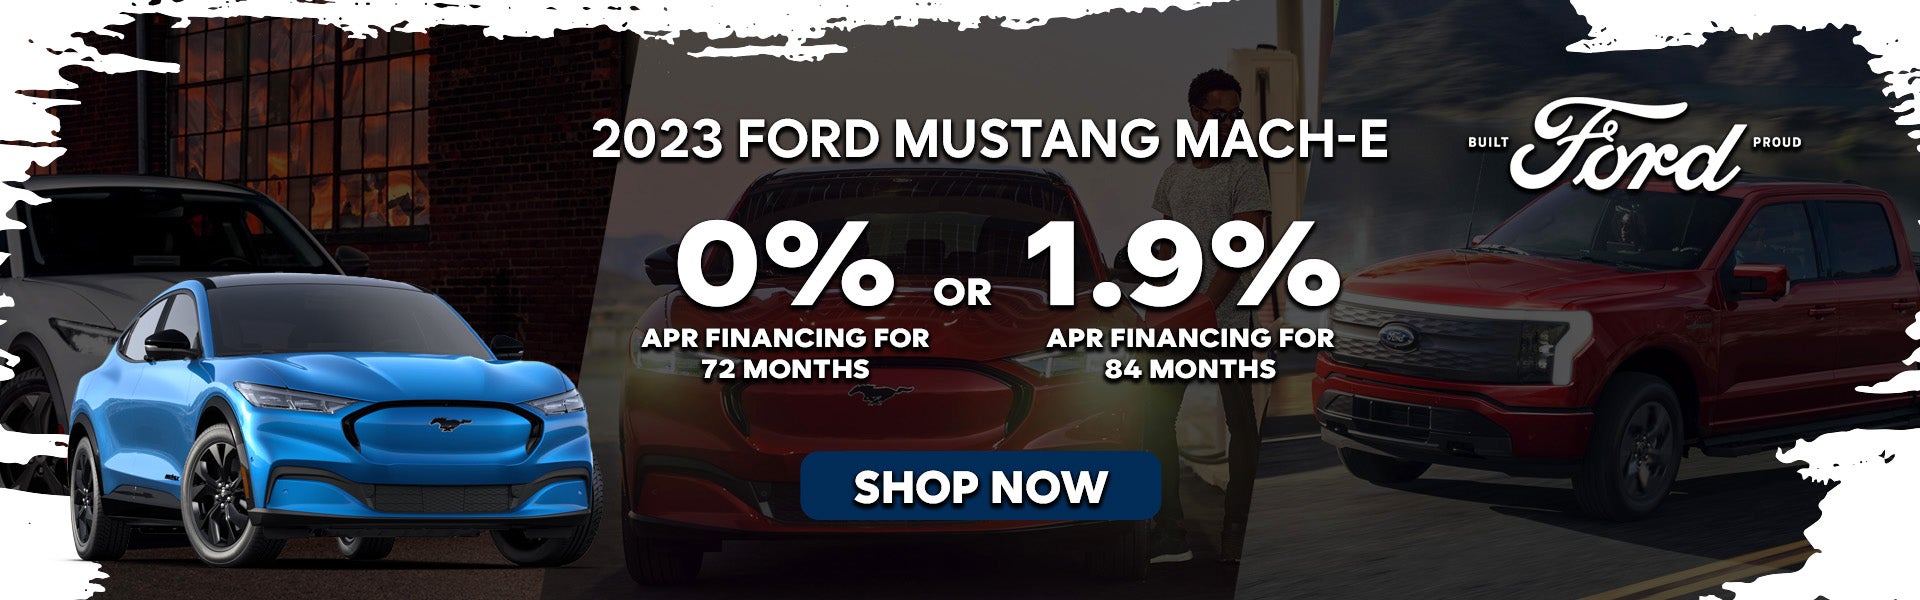 2023 Ford Mustang Mach-E Special Offer